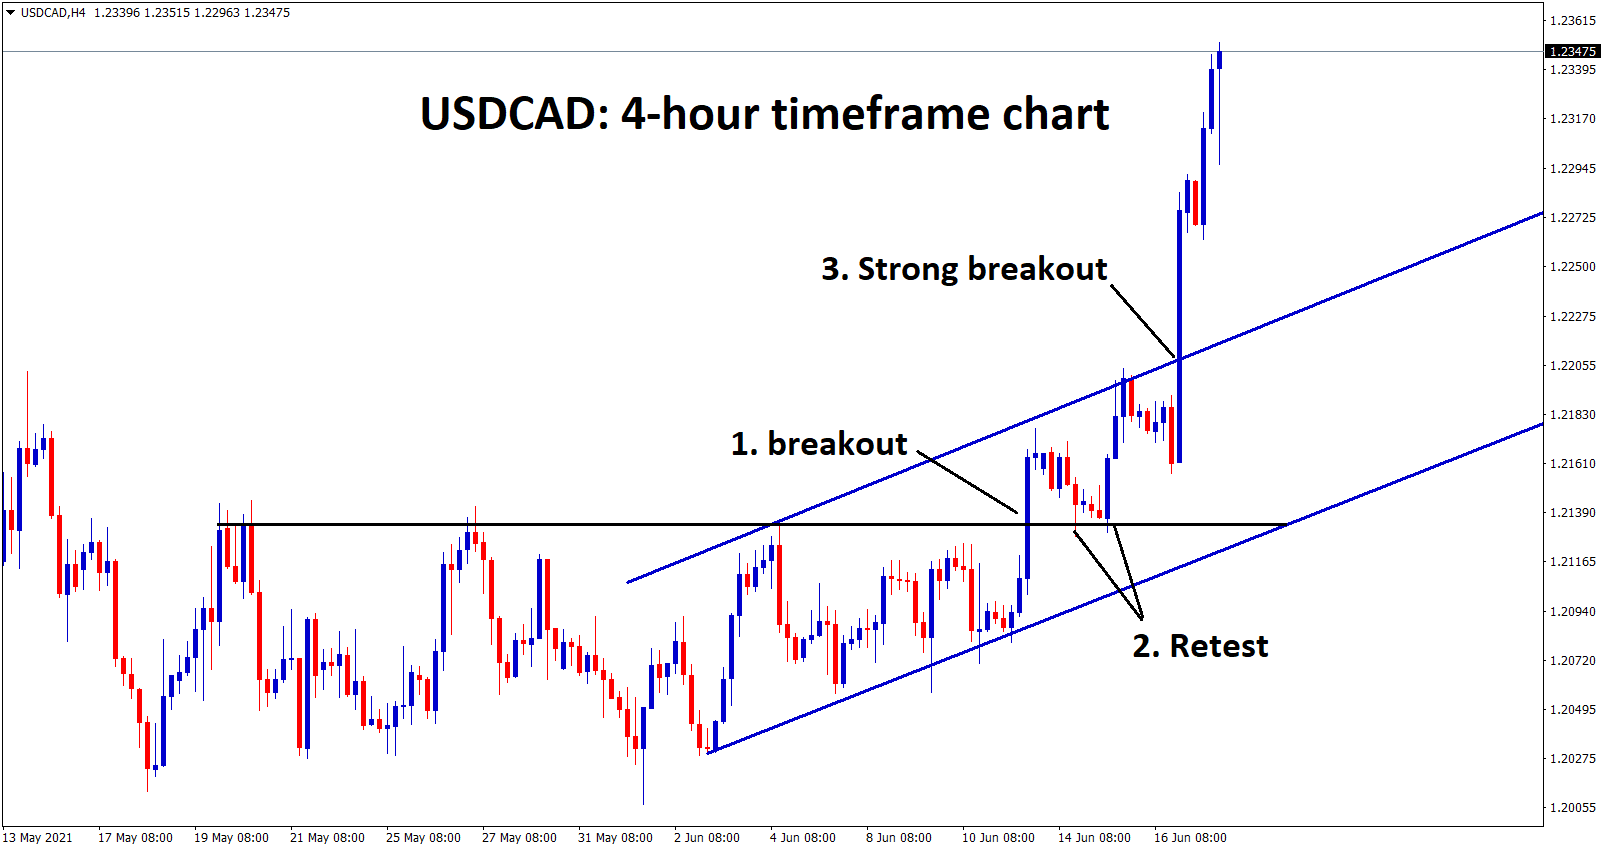 USDCAD has broken the ascending hcannel and continues to surge with extreme buyers pressure